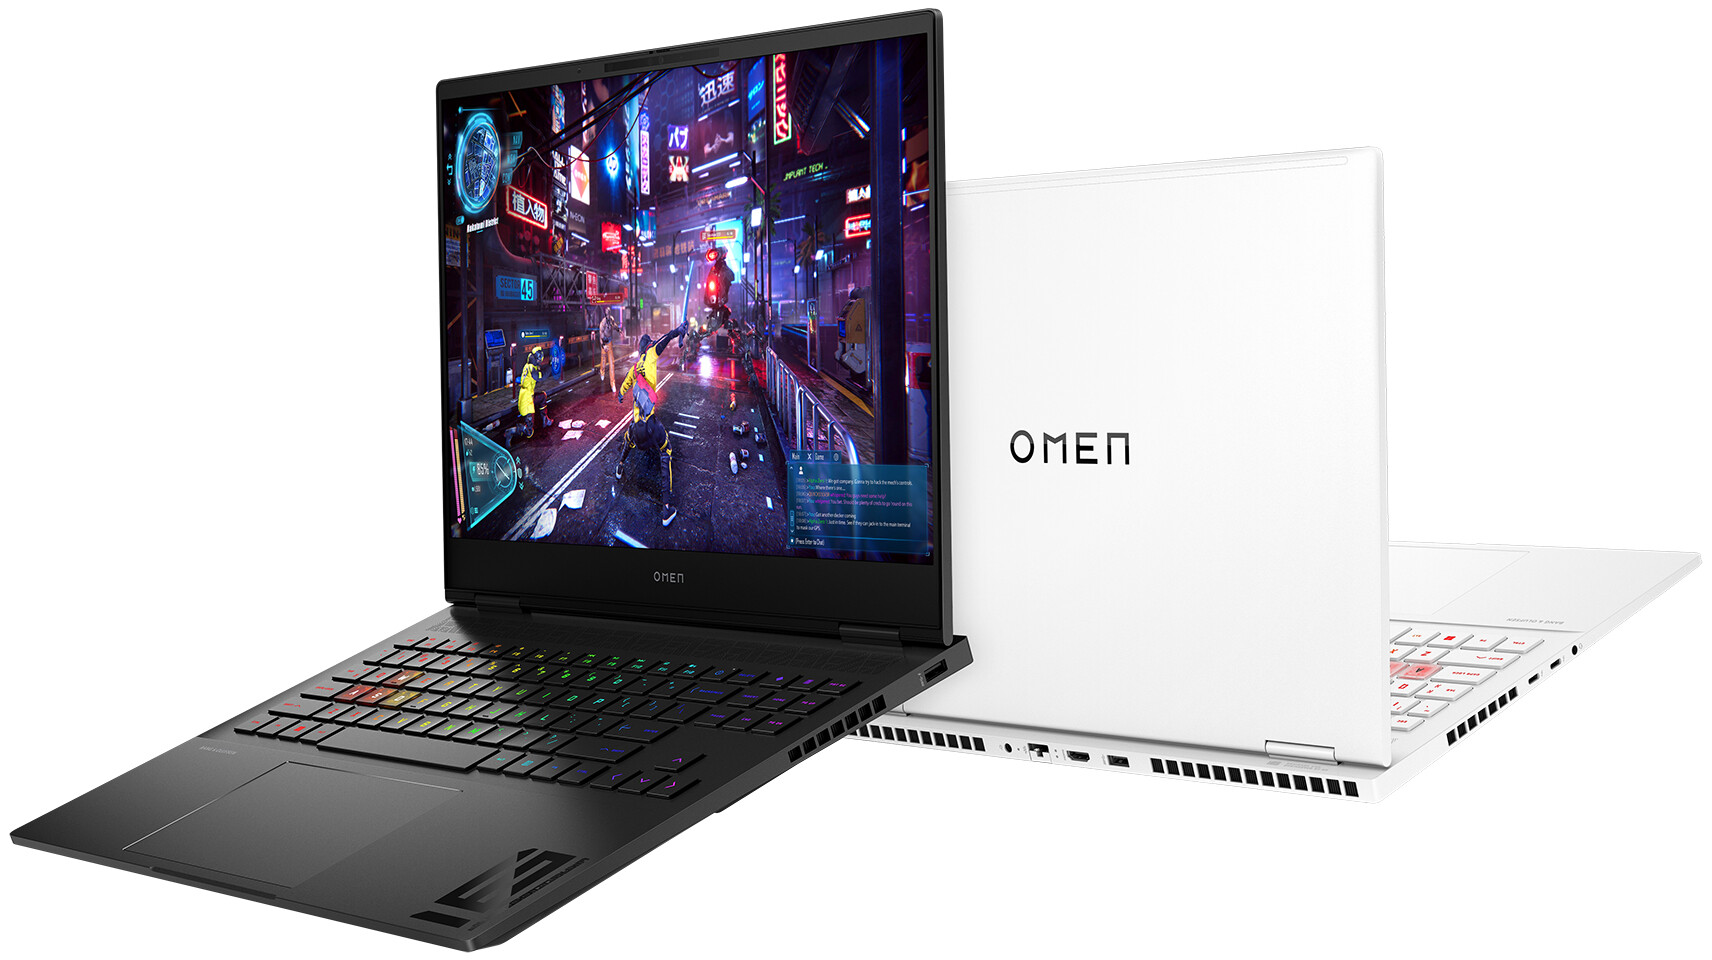 HP unveils Omen laptops with Intel and AMD chips and GeForce RTX 40 graphics starting at $1300